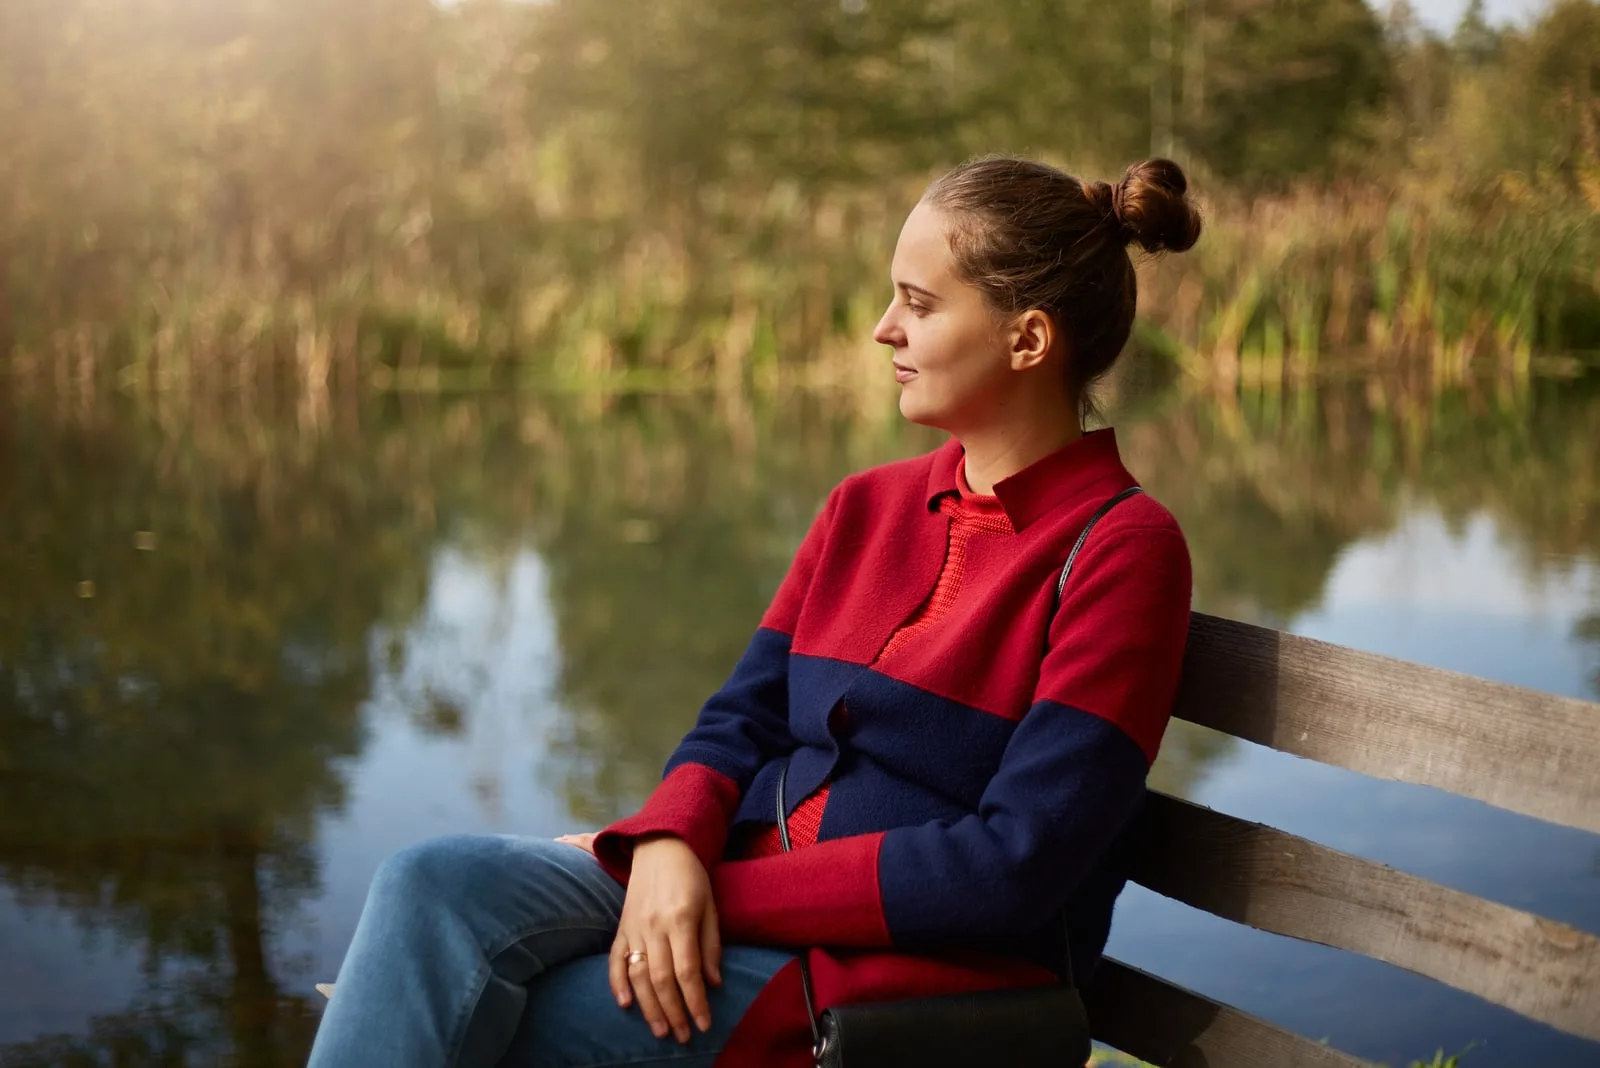 pensive woman sitting on wooden bench